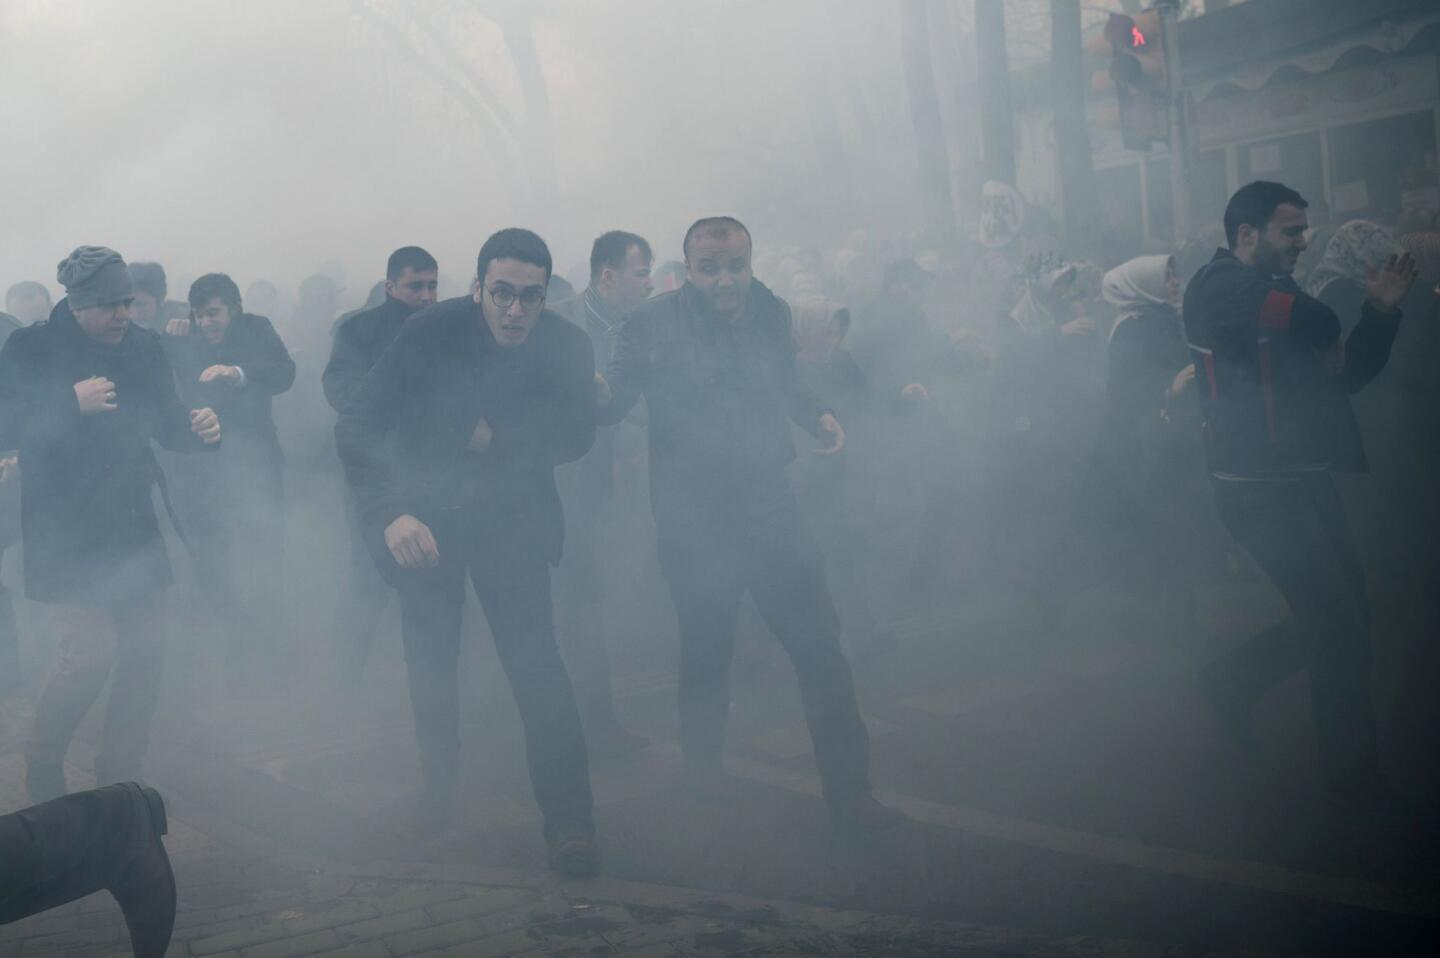 Demonstrators run as Turkish riot police use tear gas to disperse supporters of the Zaman newspaper in front of its headquarters in Istanbul on March 5, 2016, after a court ordered the seizure of the paper's parent company by government trustees.